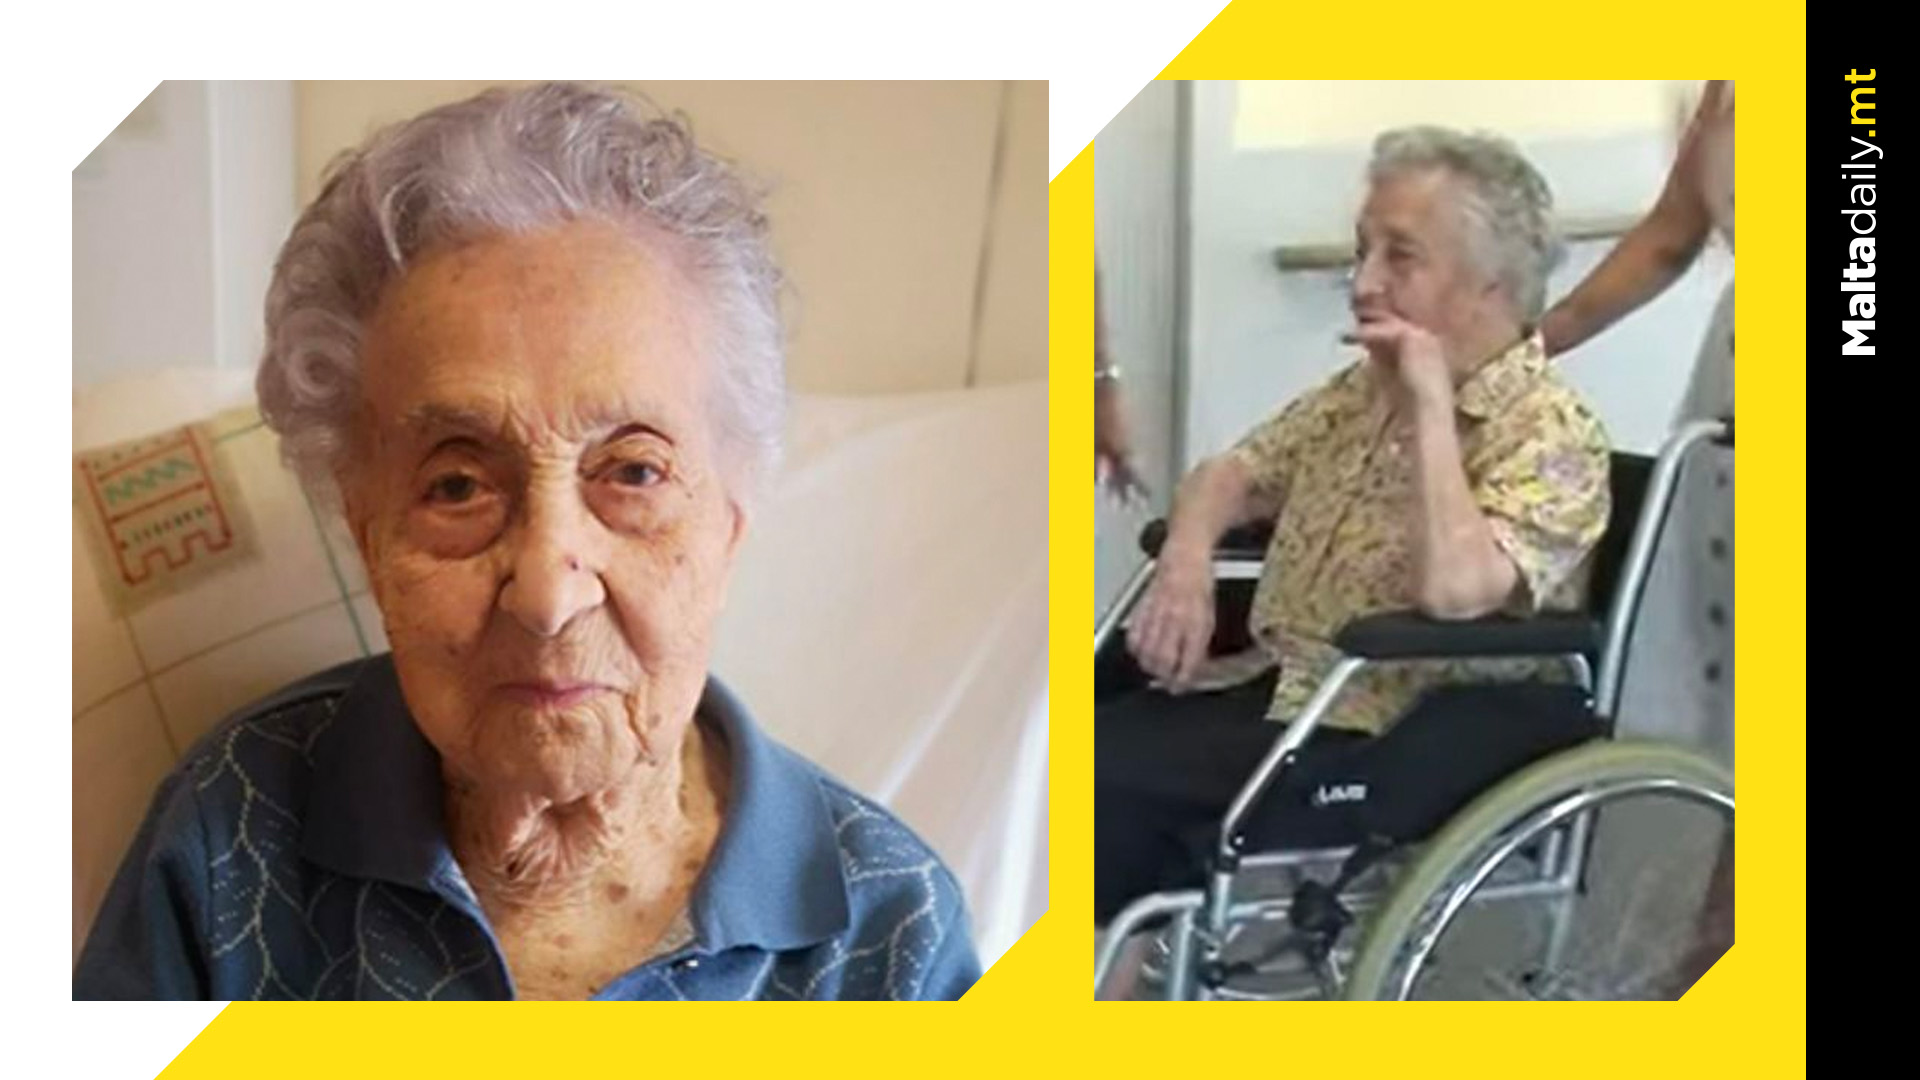 World's oldest person reveals the secret to living longer is avoiding toxic people